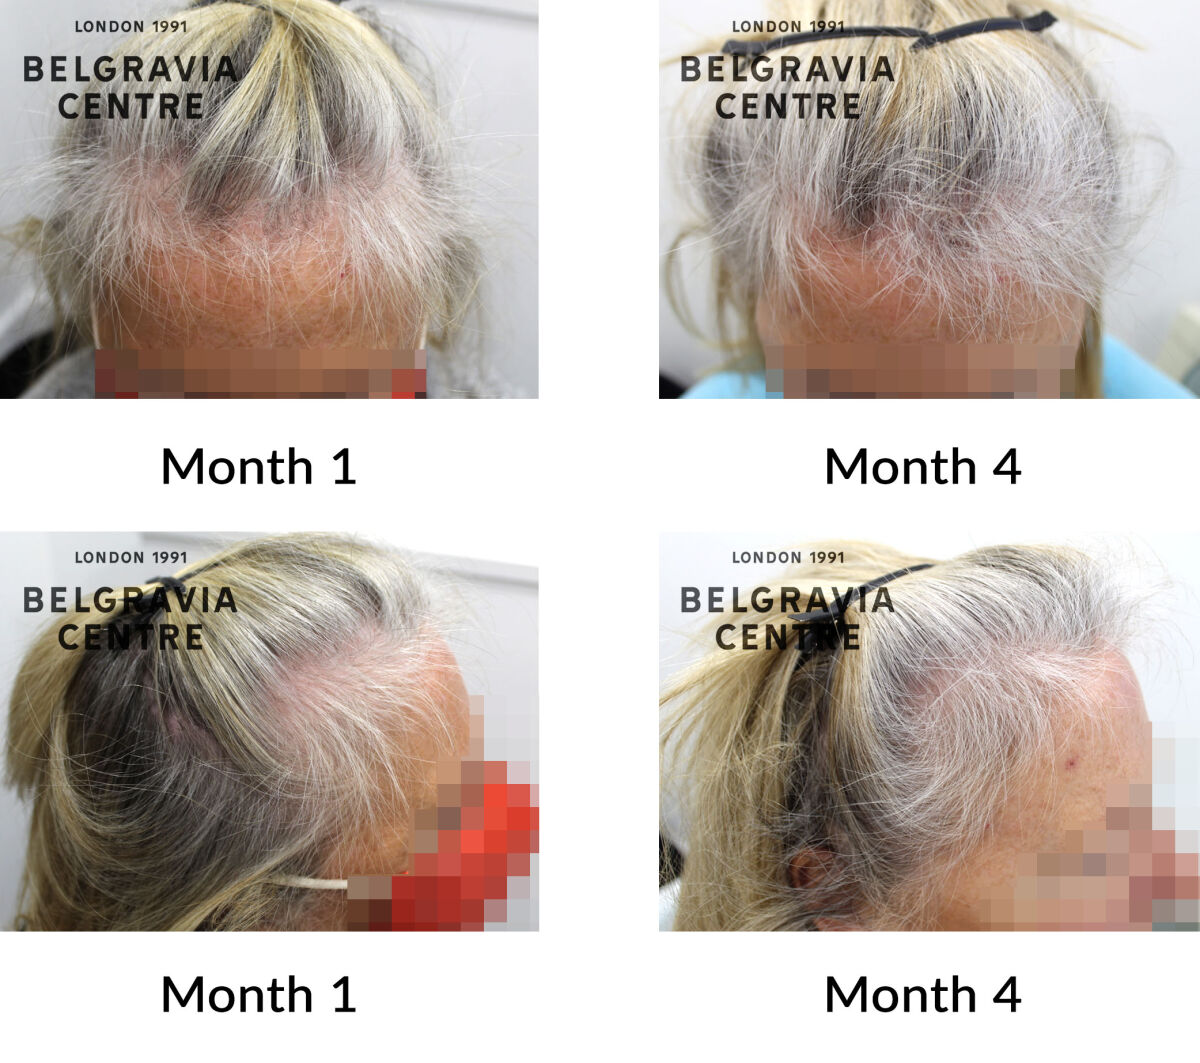 diffuse hair loss and female pattern hair loss the begravia centre 43652